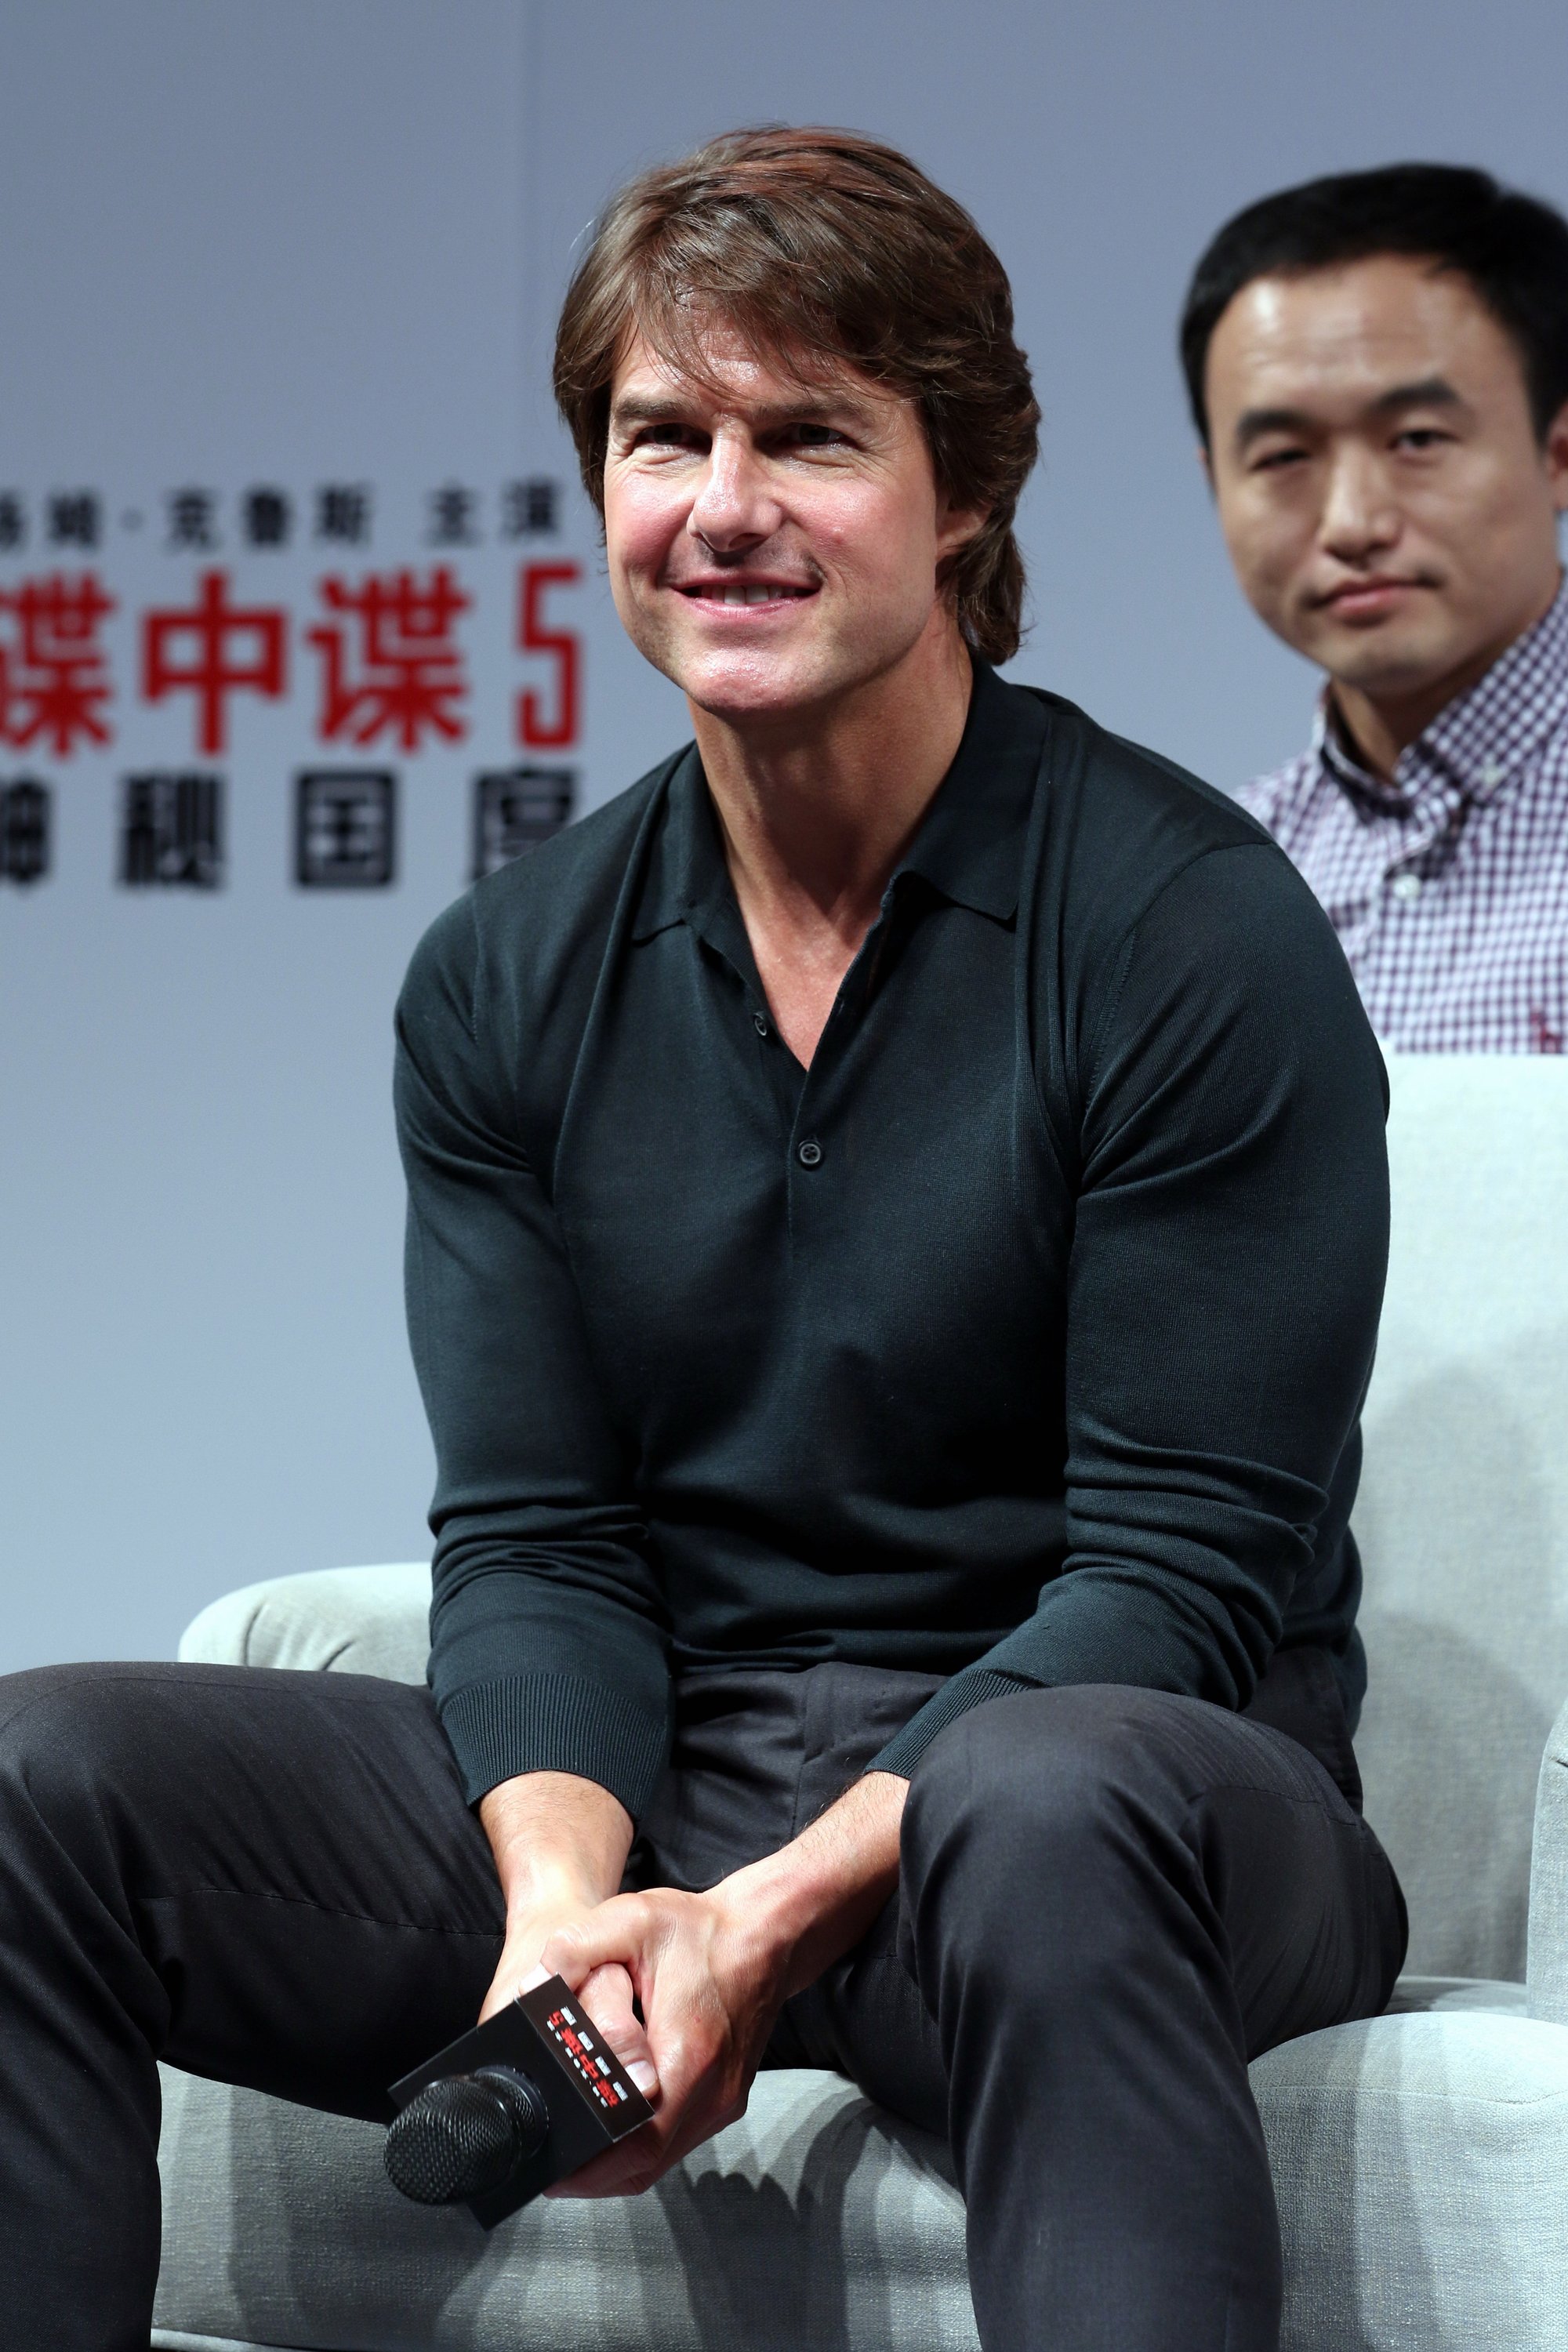 mission-impossible-rogue-nation-shanghai-press-sept6-2015-124.jpg